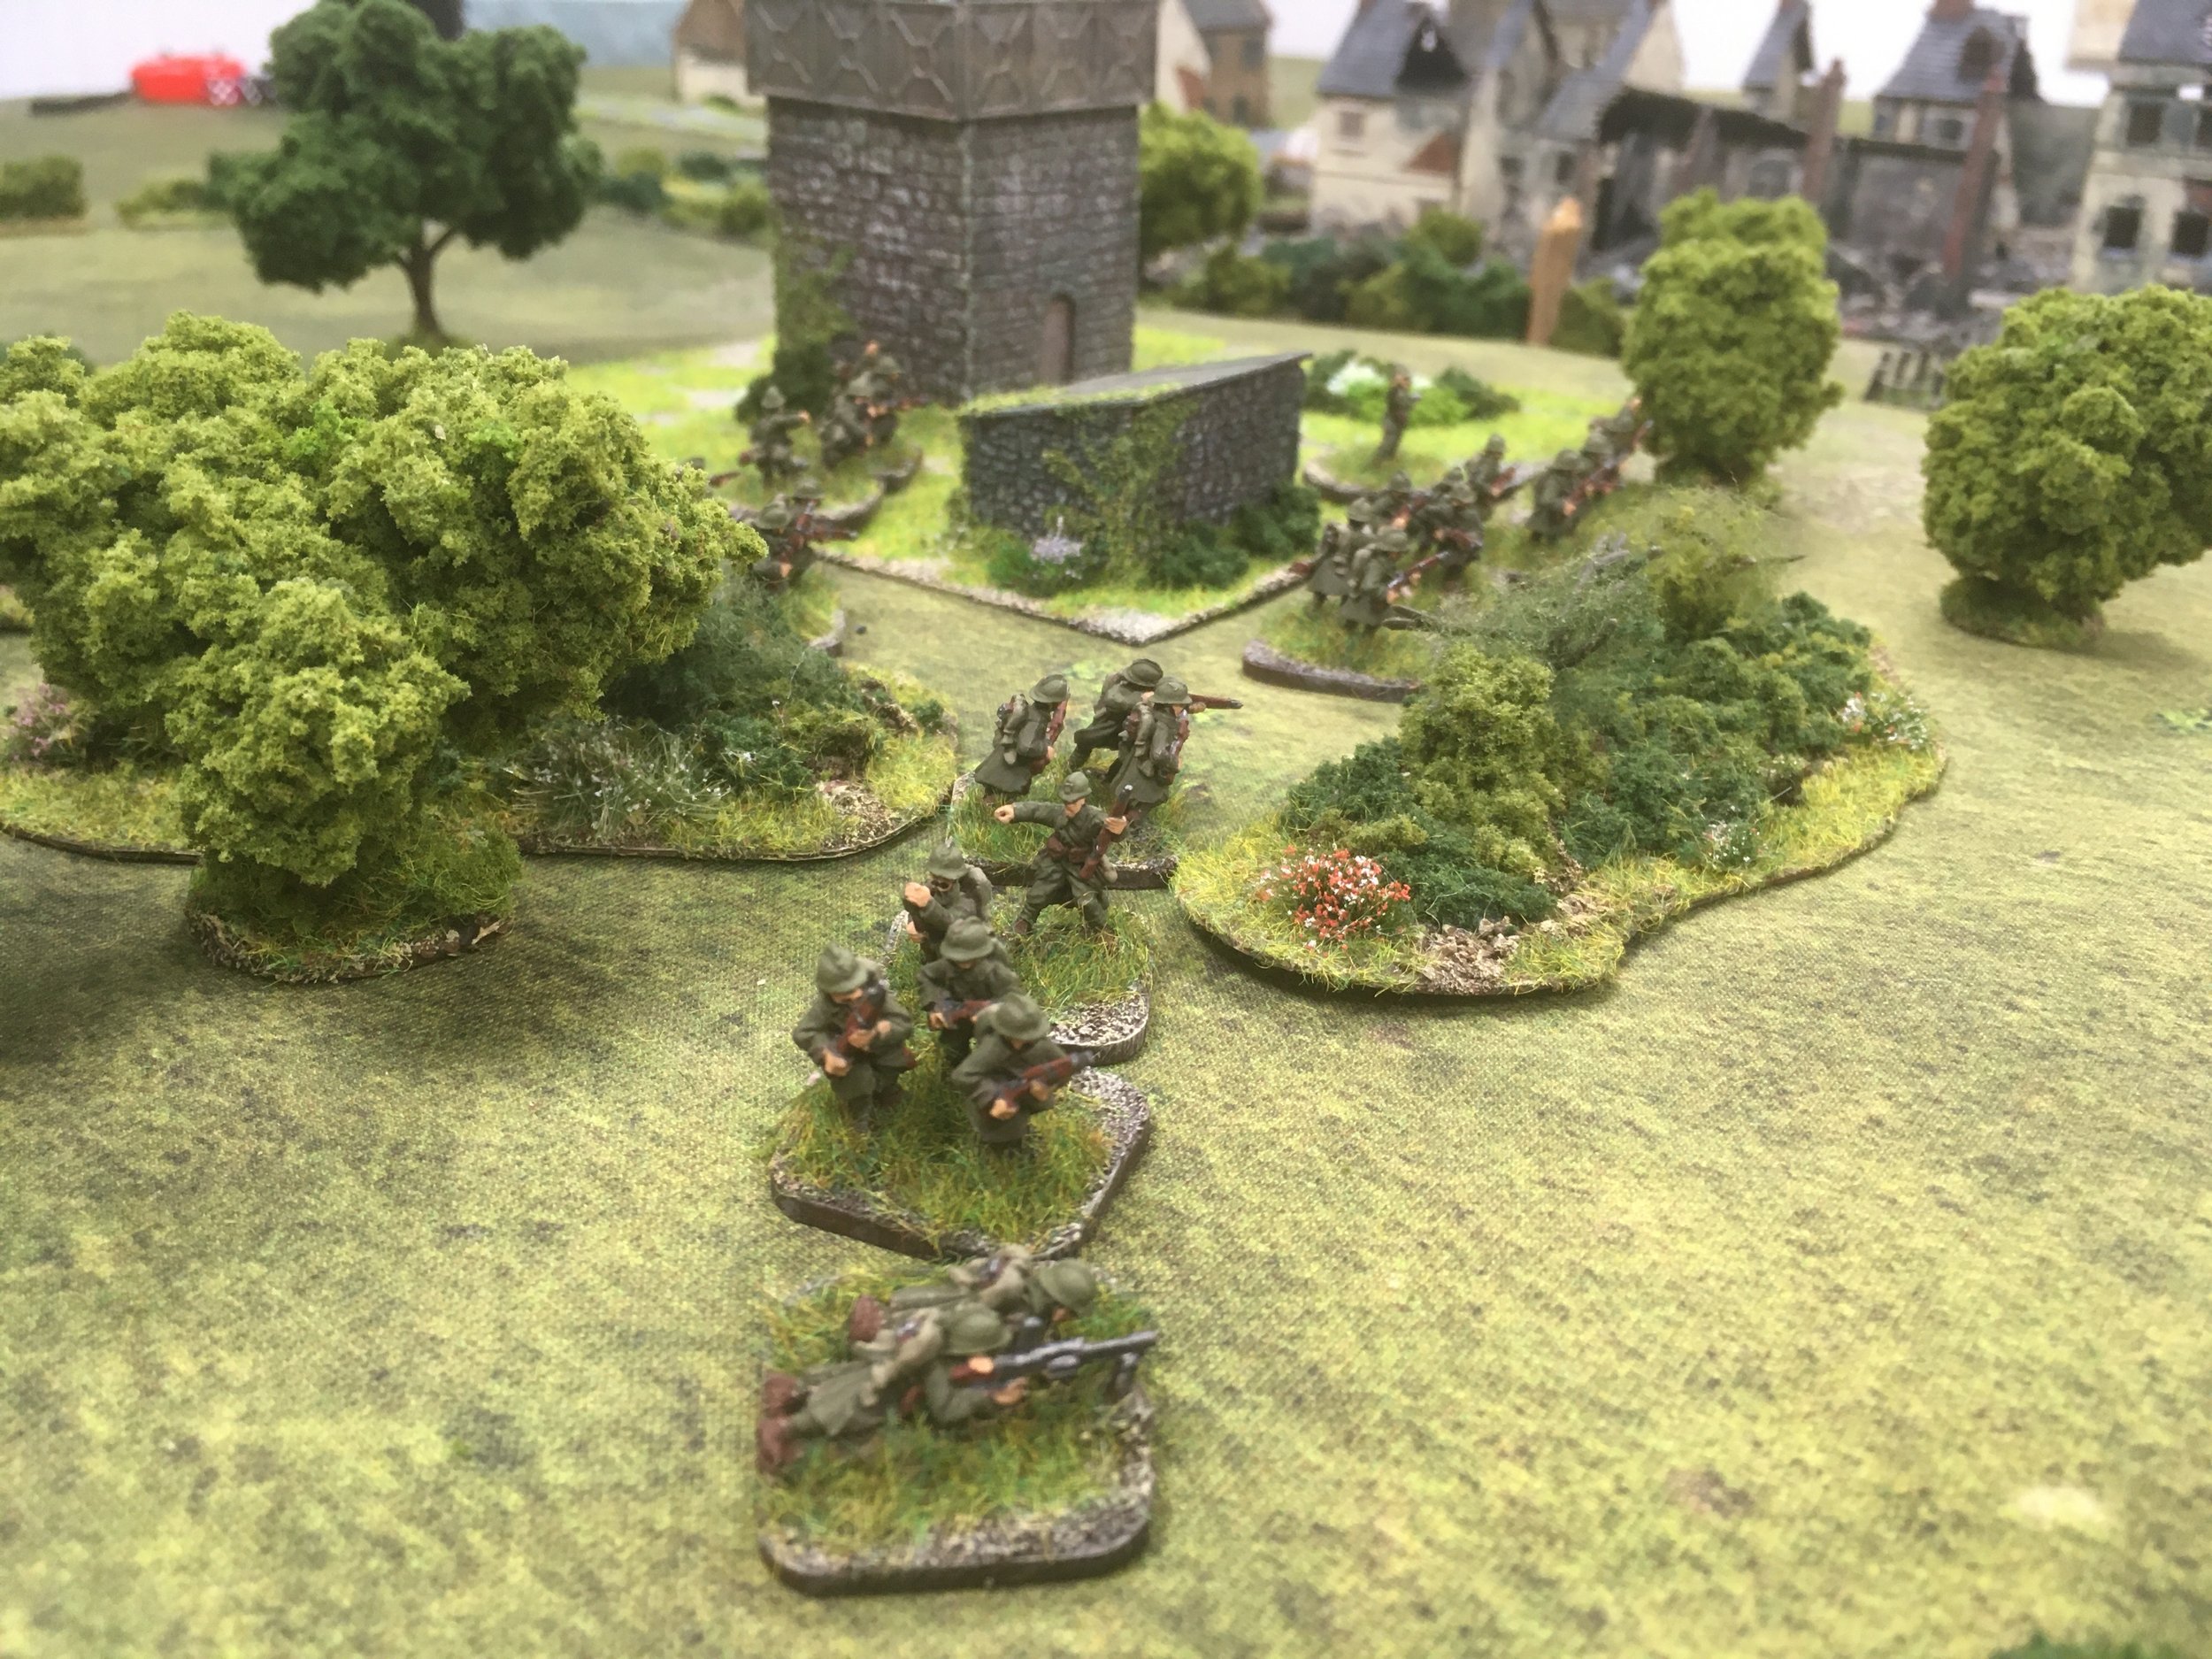 In the woods on the German left a platoon of French infantry are also revealed.